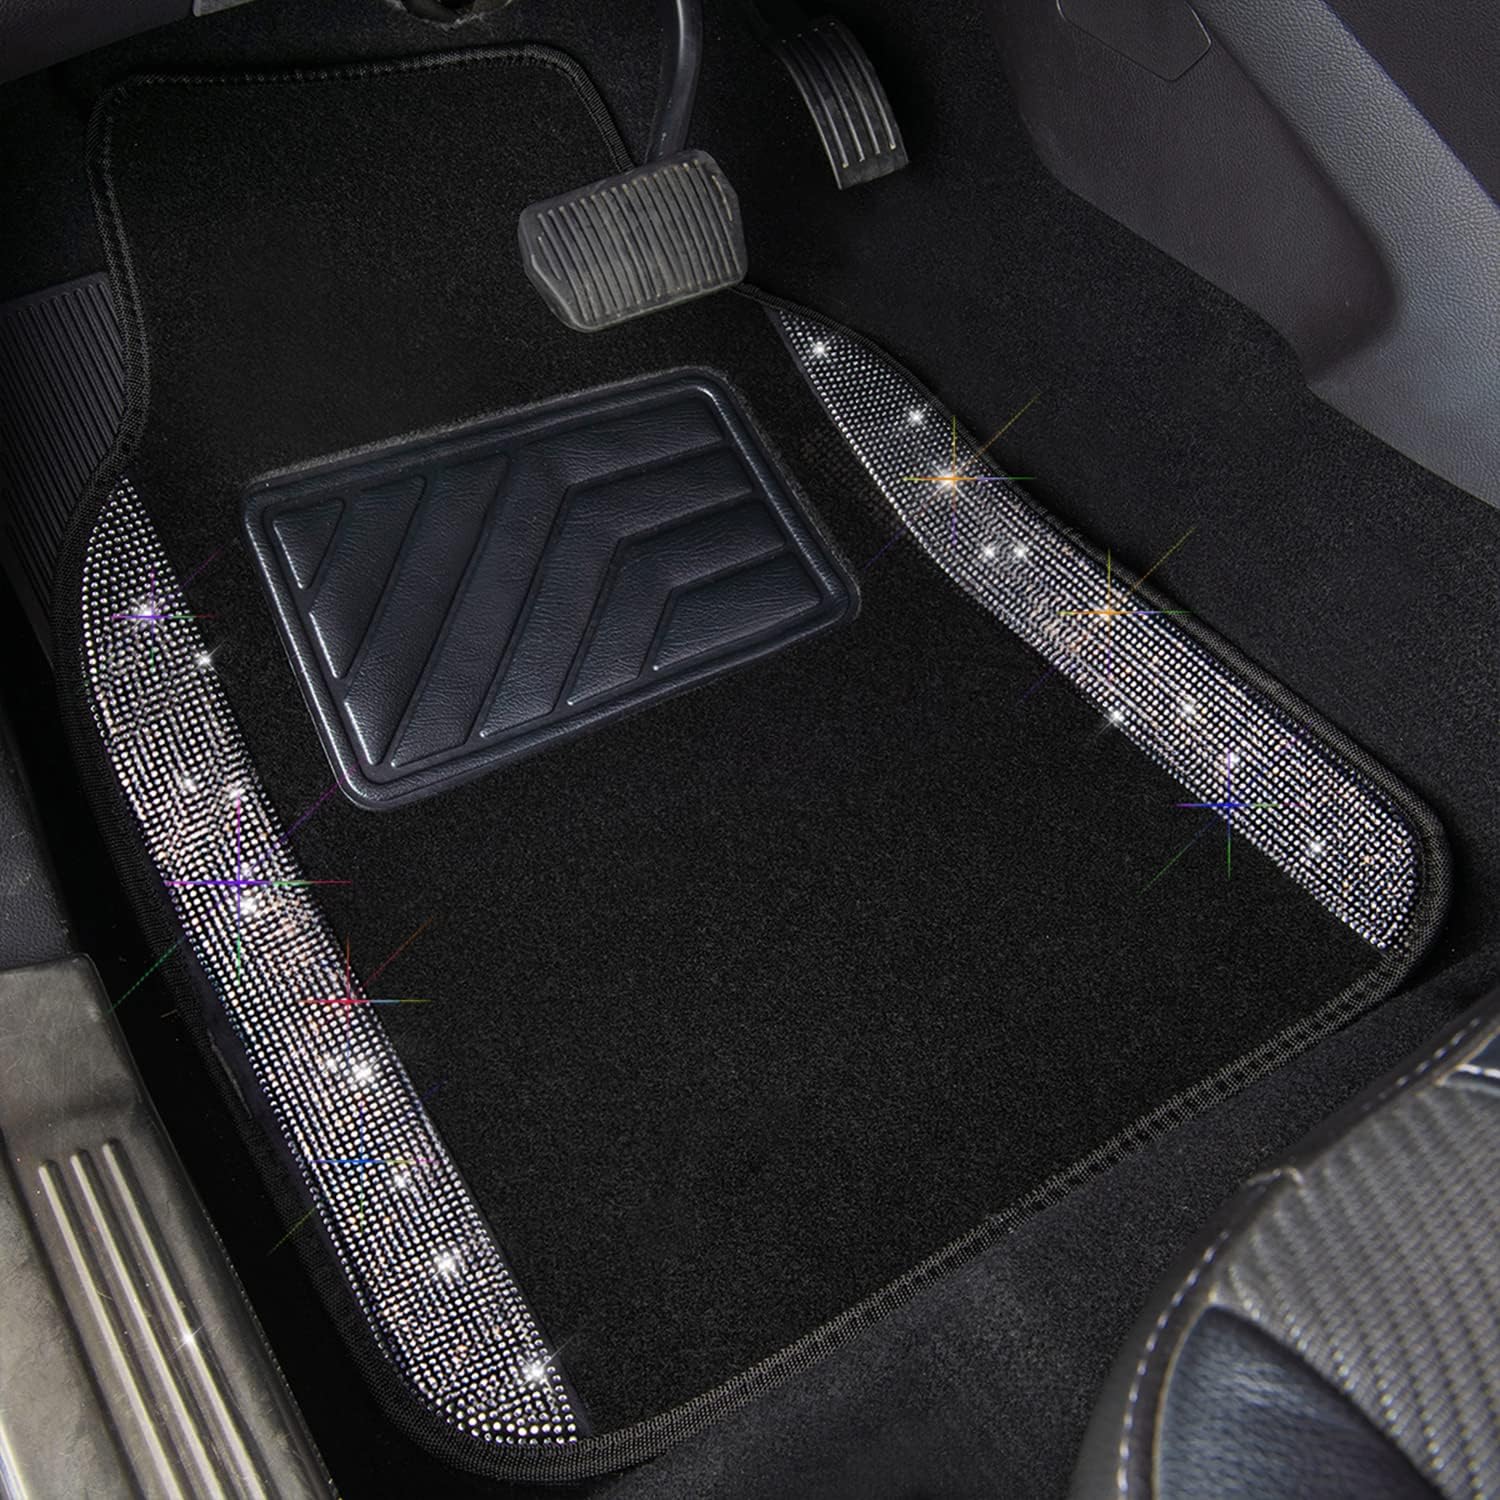 CAR PASS Shining Rhinestones Carpet, Bling Crystal Diamond Sparkly Glitter Car Floor Mats, Car Seat Covers, Shining Rhinestone Diamond Waterproof Faux Leather Two Front,Silver